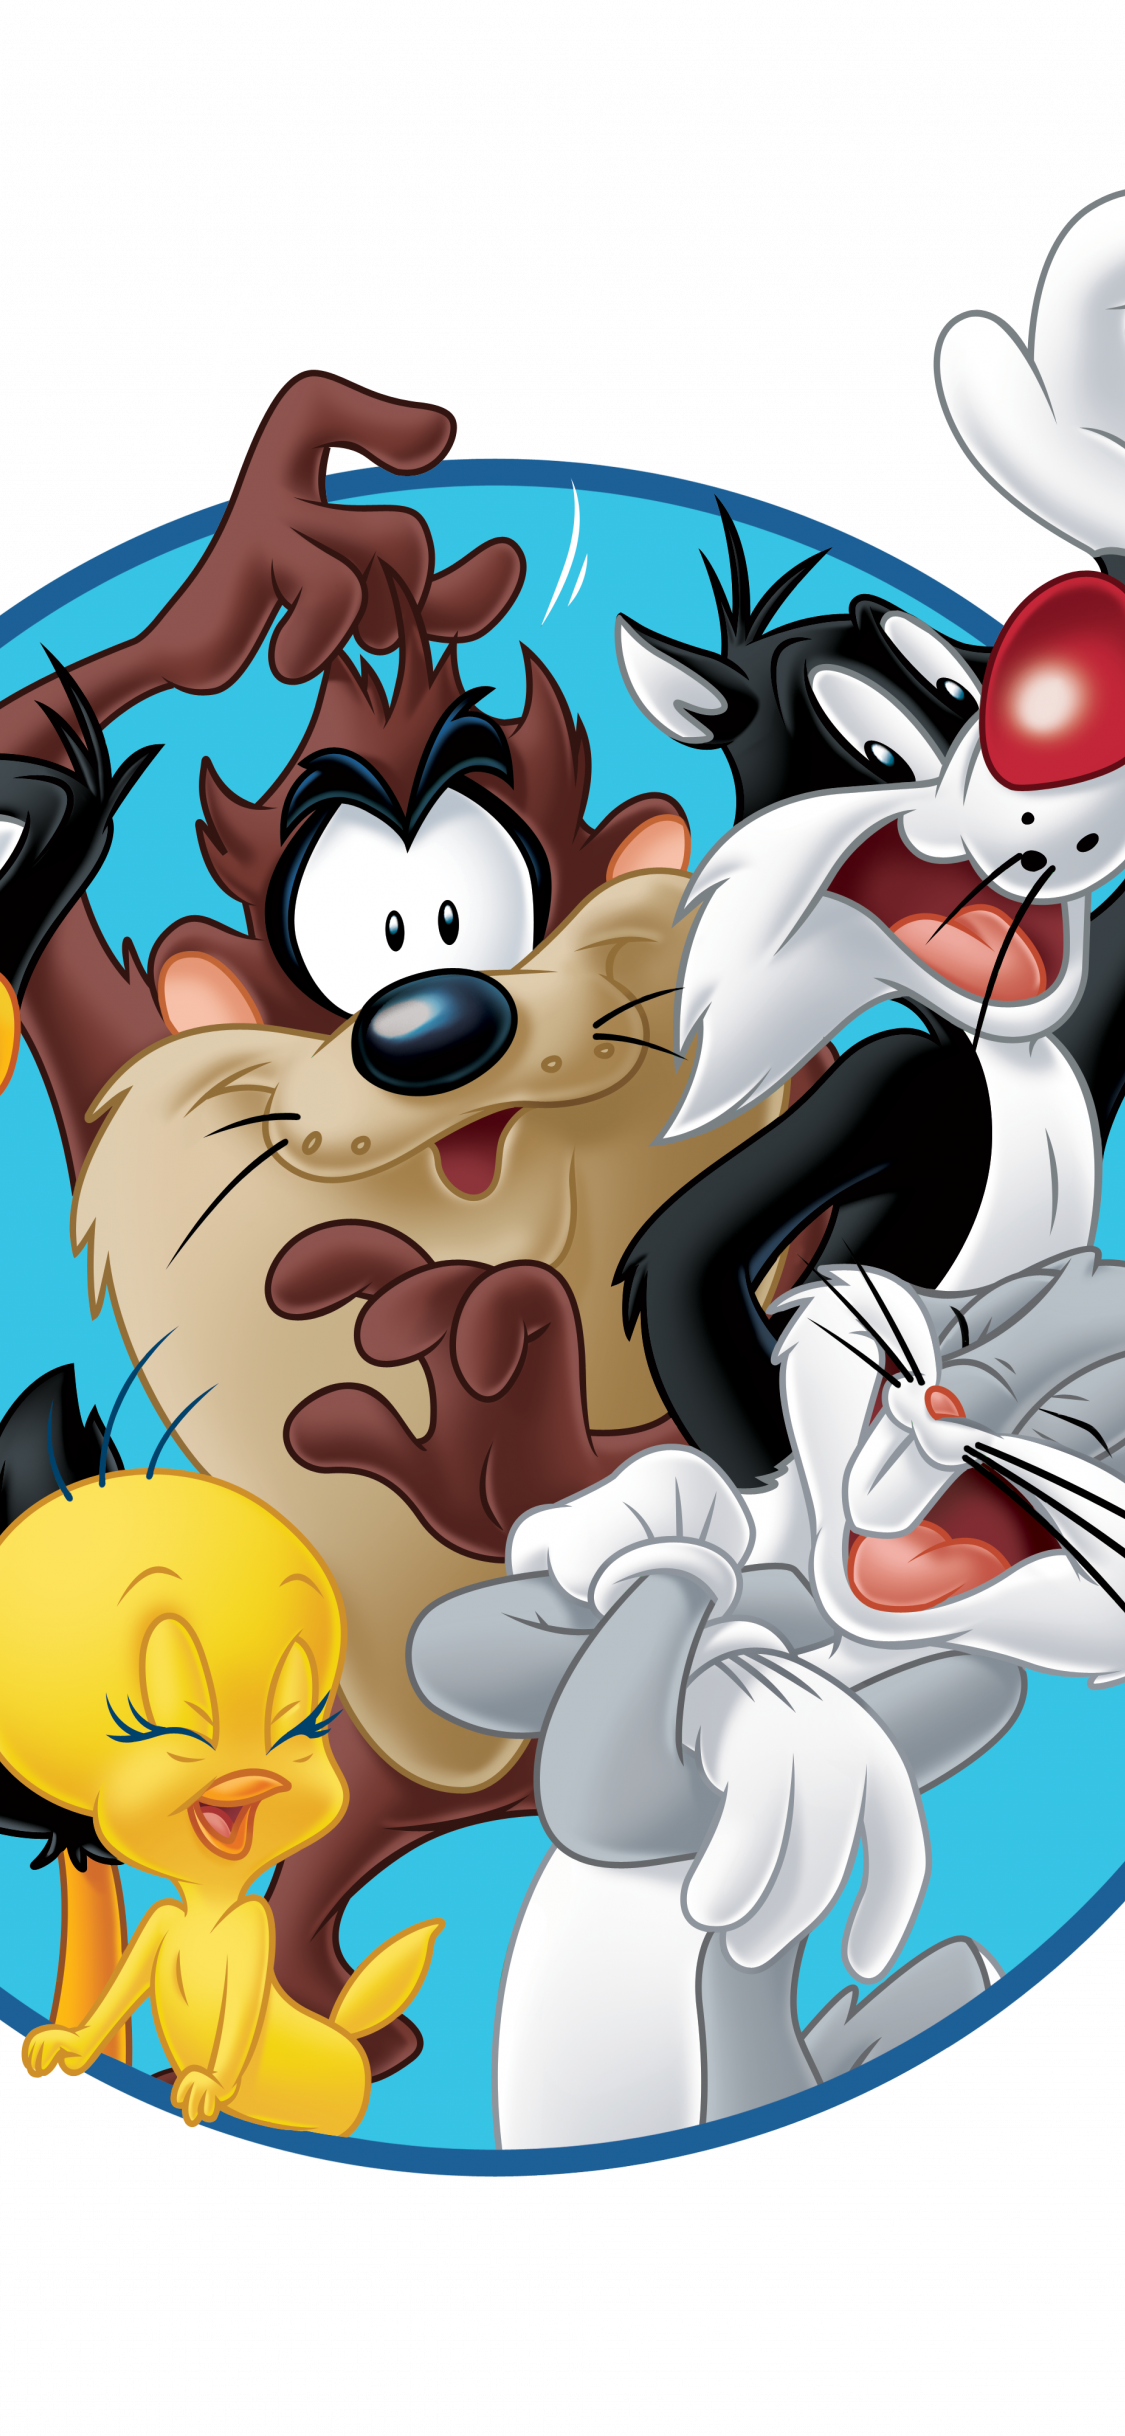 Free download The Looney Tunes Show Wallpaper Download Cartoons Image [4004x4006] for your Desktop, Mobile & Tablet. Explore Tunes Wallpaper. Tunes Wallpaper, Looney Tunes Wallpaper, Looney Tunes Background